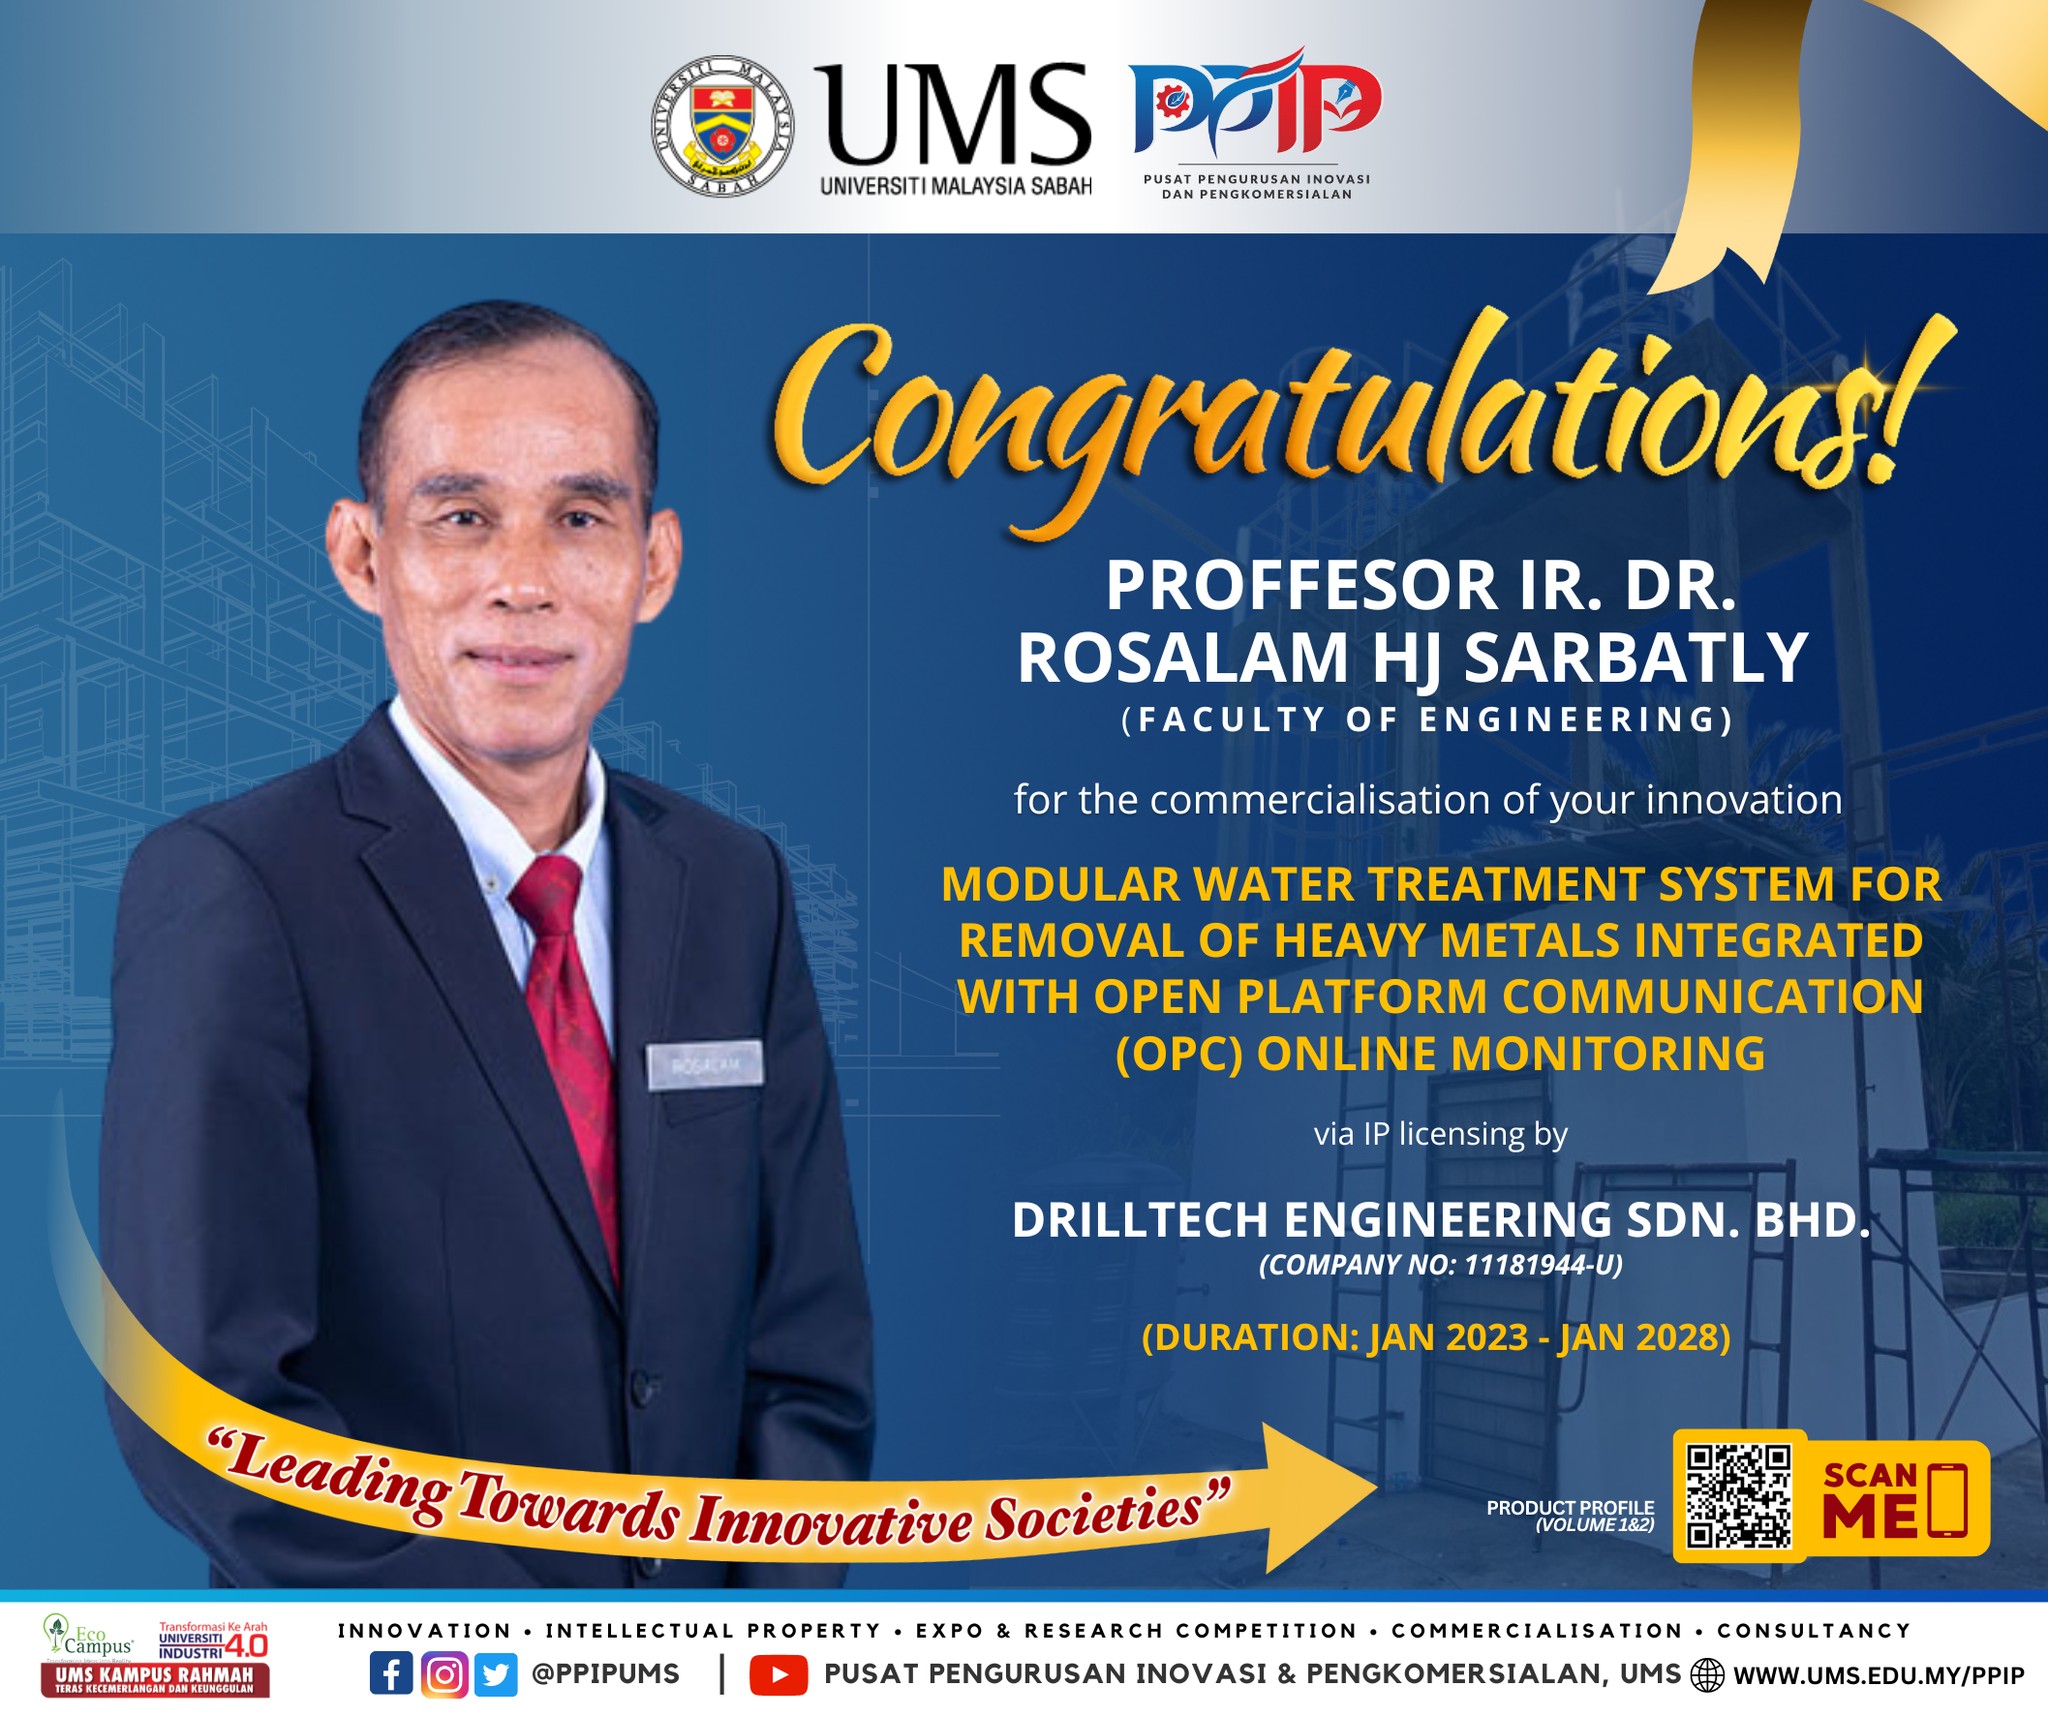 Congratulations to Professor Ir. Dr. Rosalam Hj. Sarbatly, for the commercialisation of your innovation!